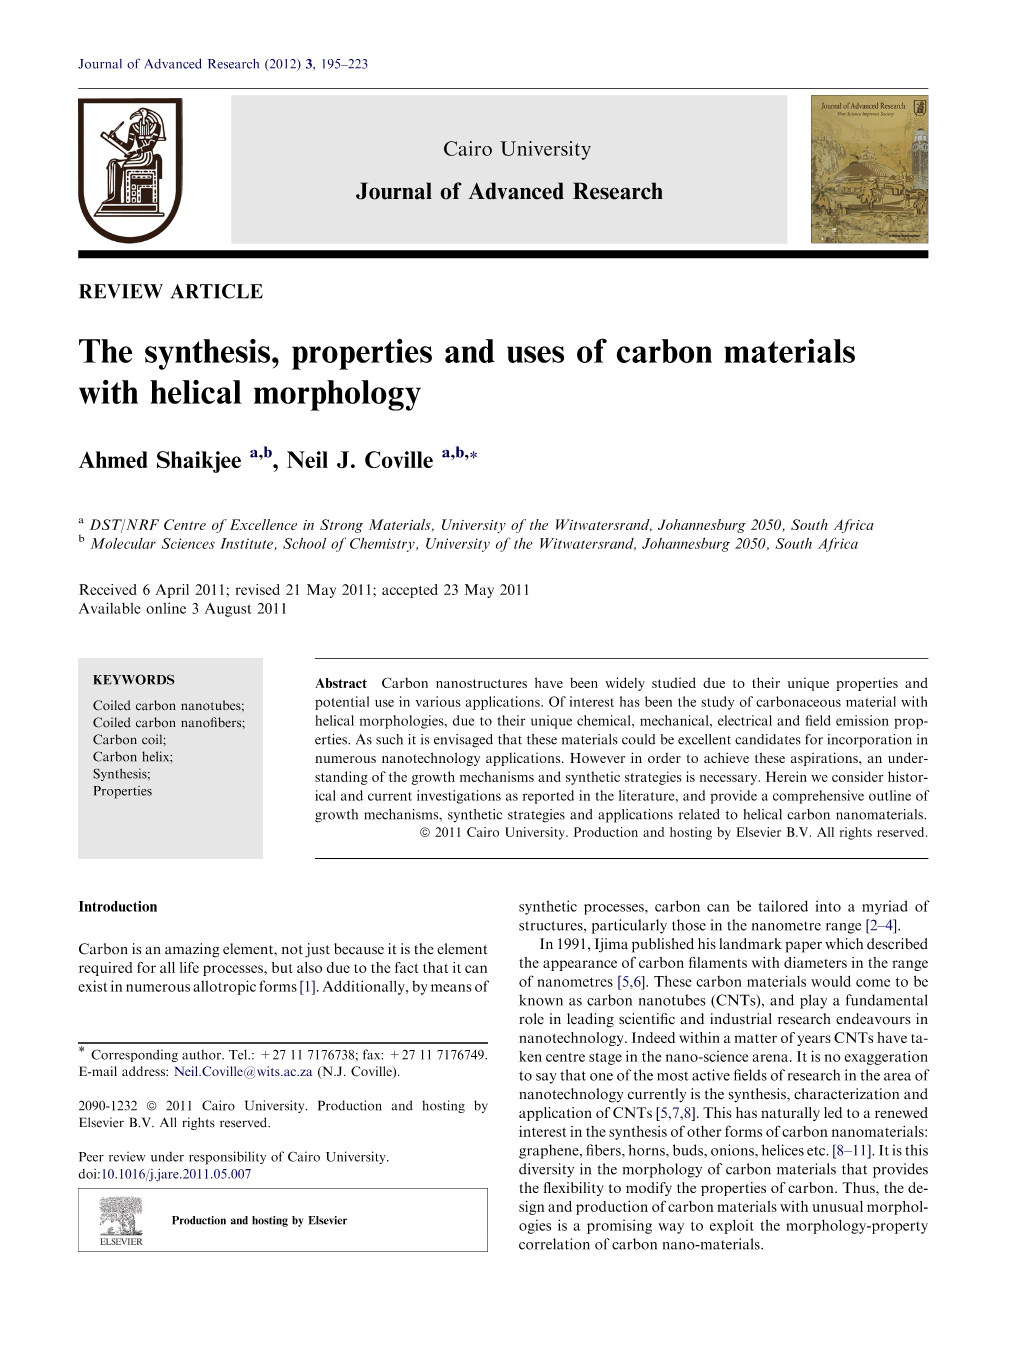 The Synthesis, Properties and Uses of Carbon Materials with Helical Morphology